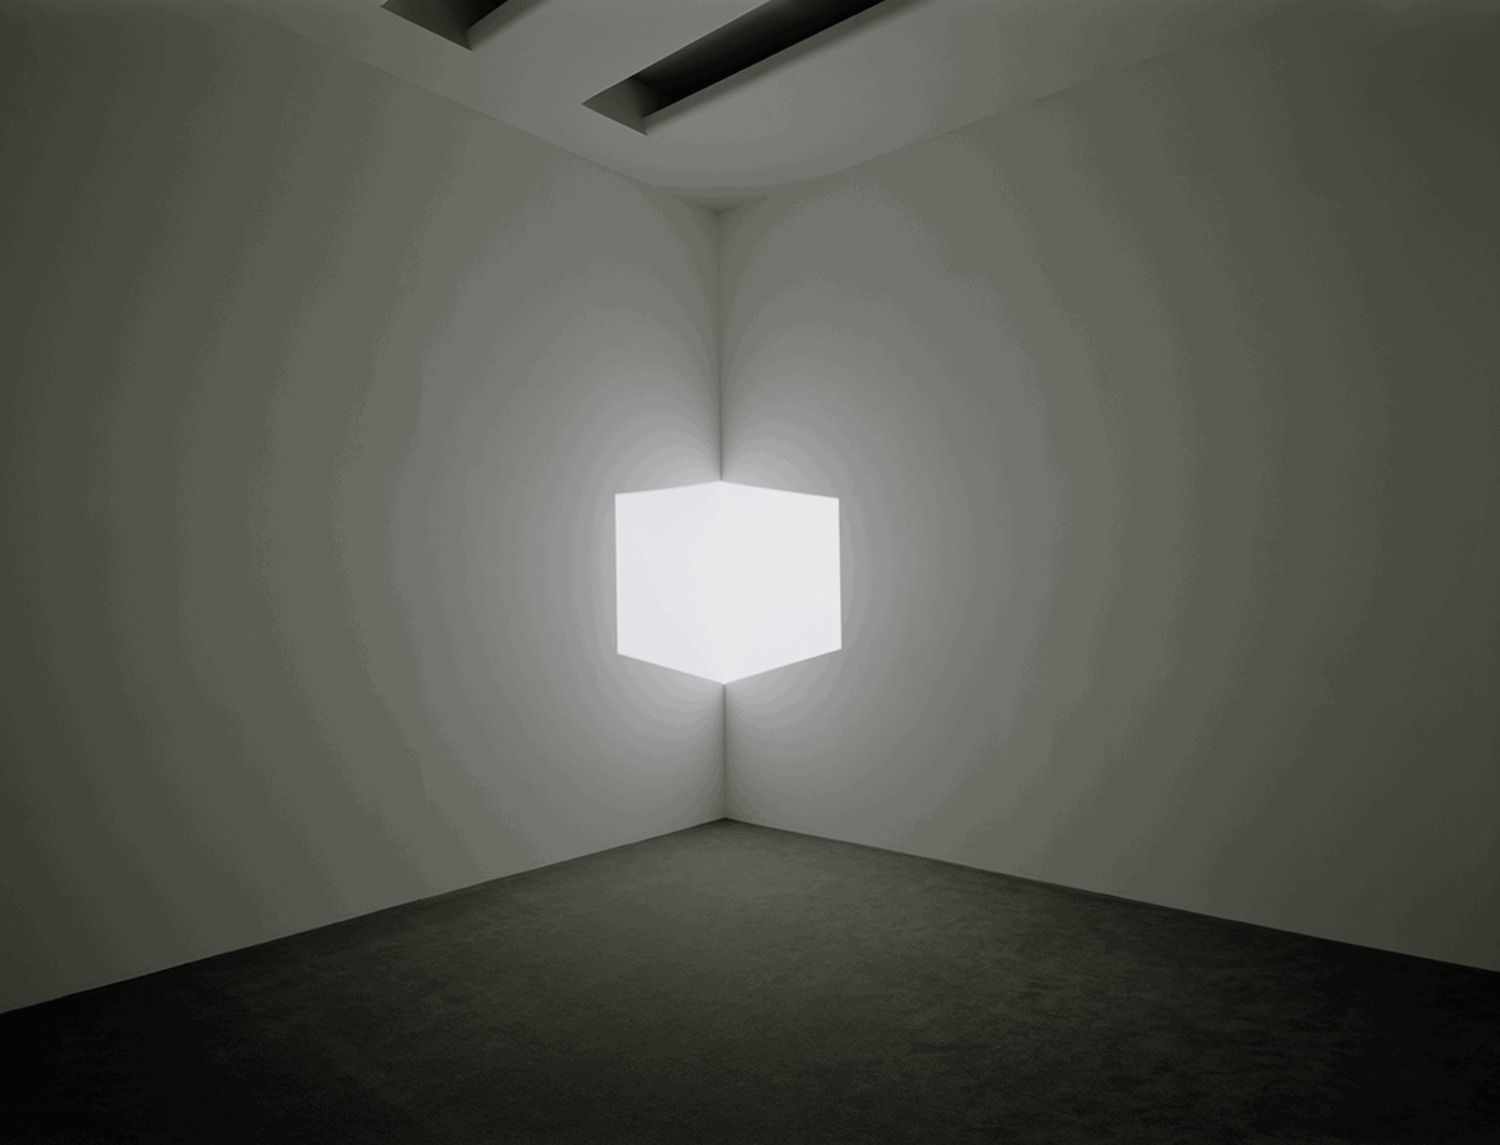 51a7b43ab3fc4b90270003a4_light-matters-seeing-the-light-with-james-turrell_afrum1.jpg